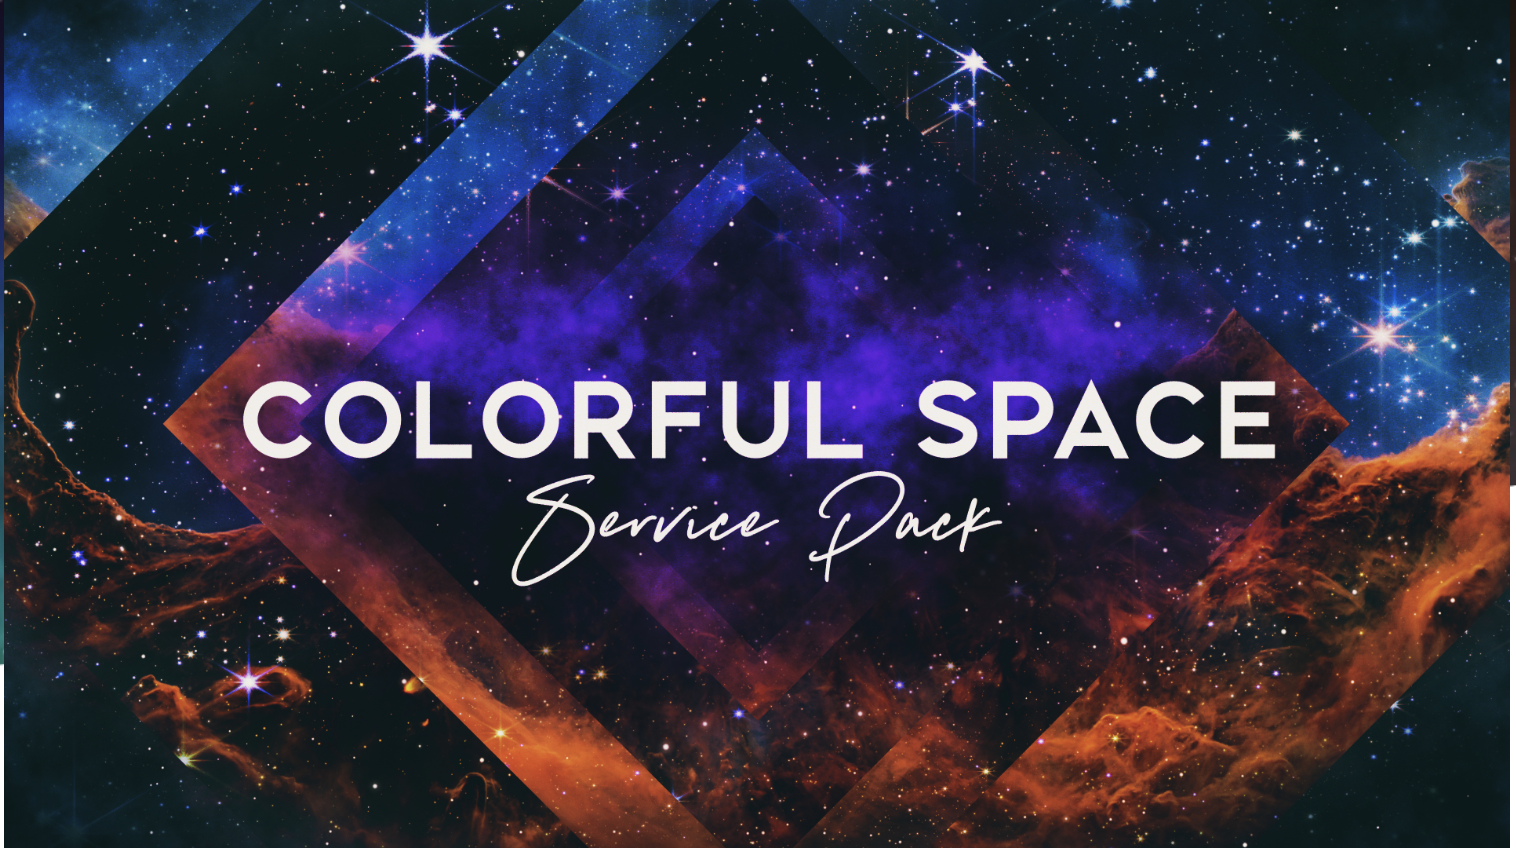 Colorful Space Service Pack